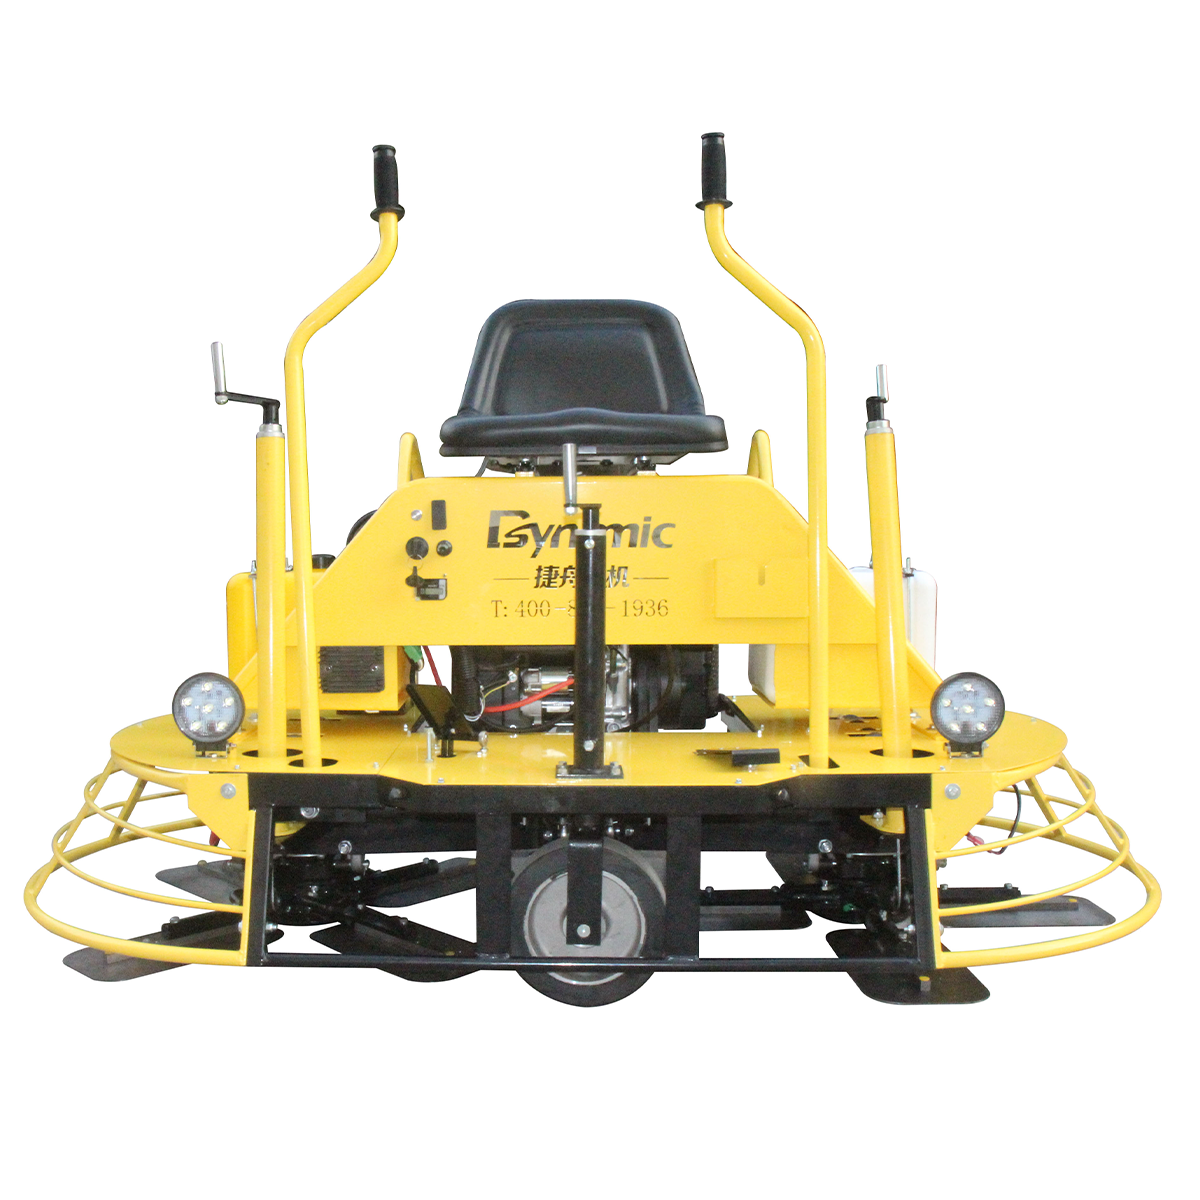 QUM-78 Two 1m/36 inch working faces Ride-on Power Trowel Featured Image